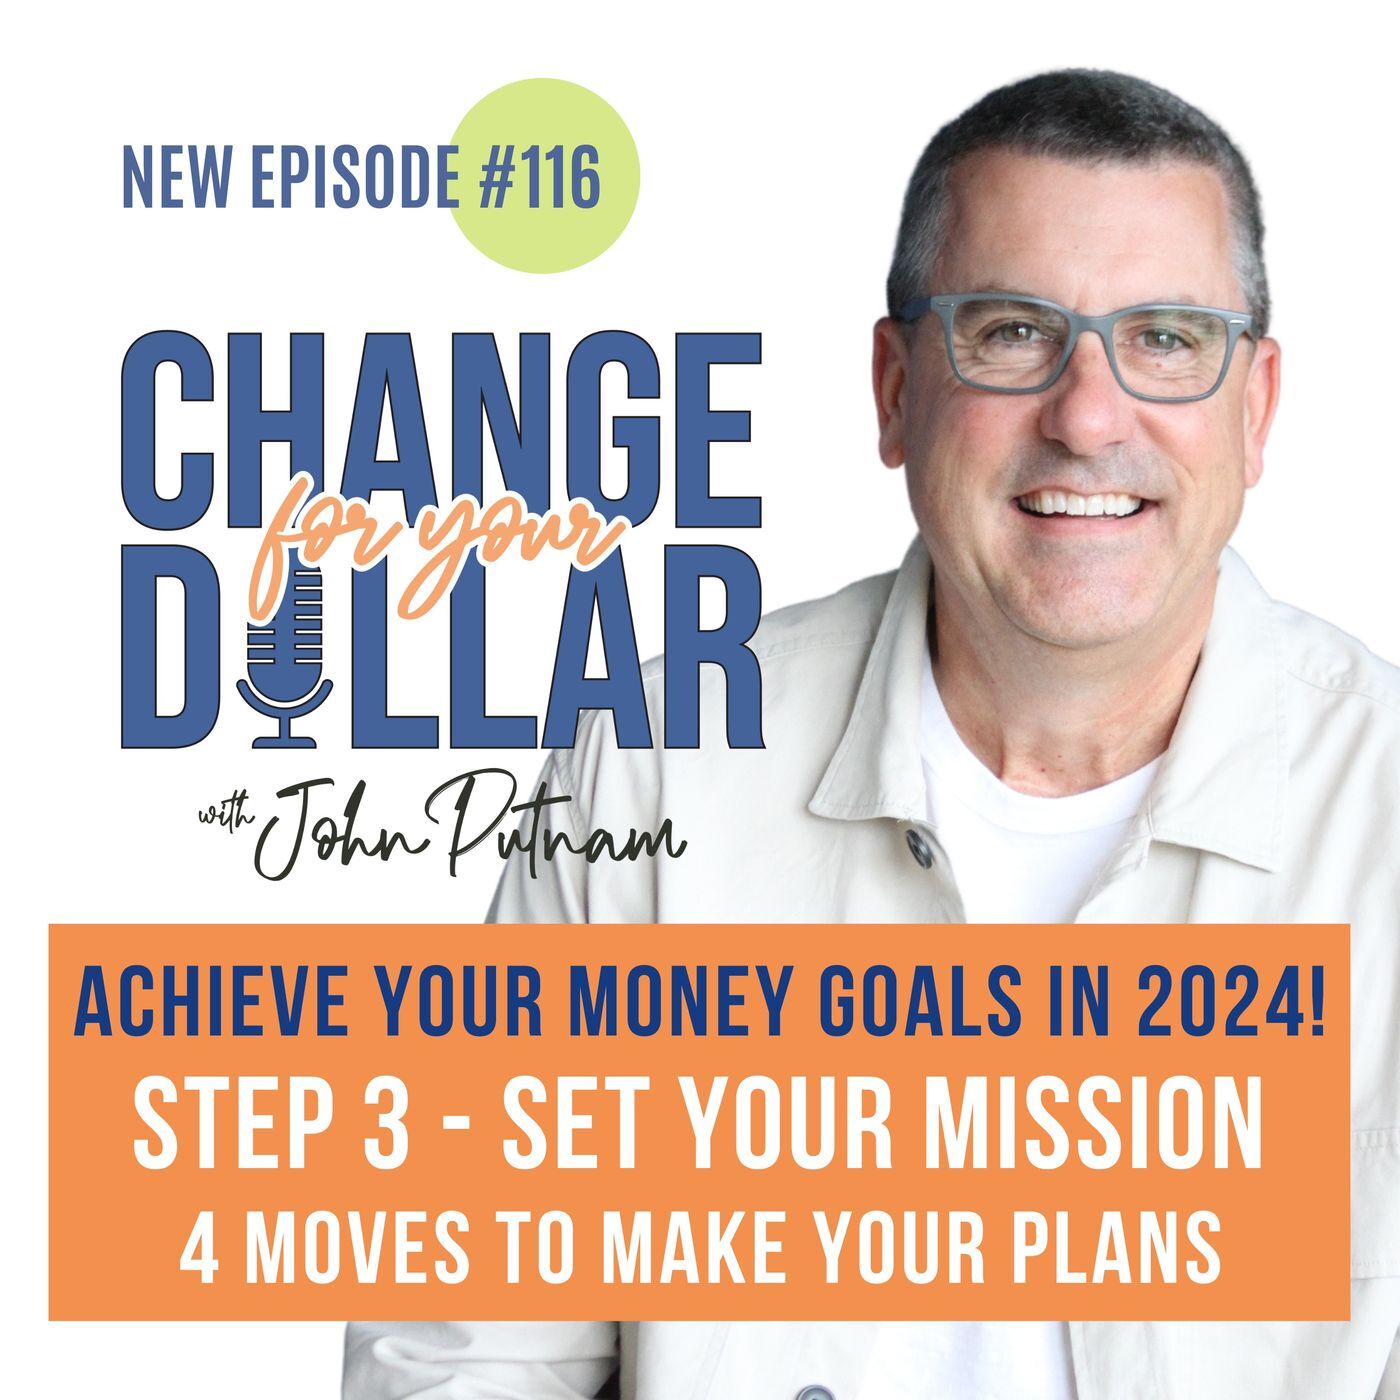 116 - Achieve Your Money Goals in 2024! Step 3 - SET YOUR MISSION with 4 Moves